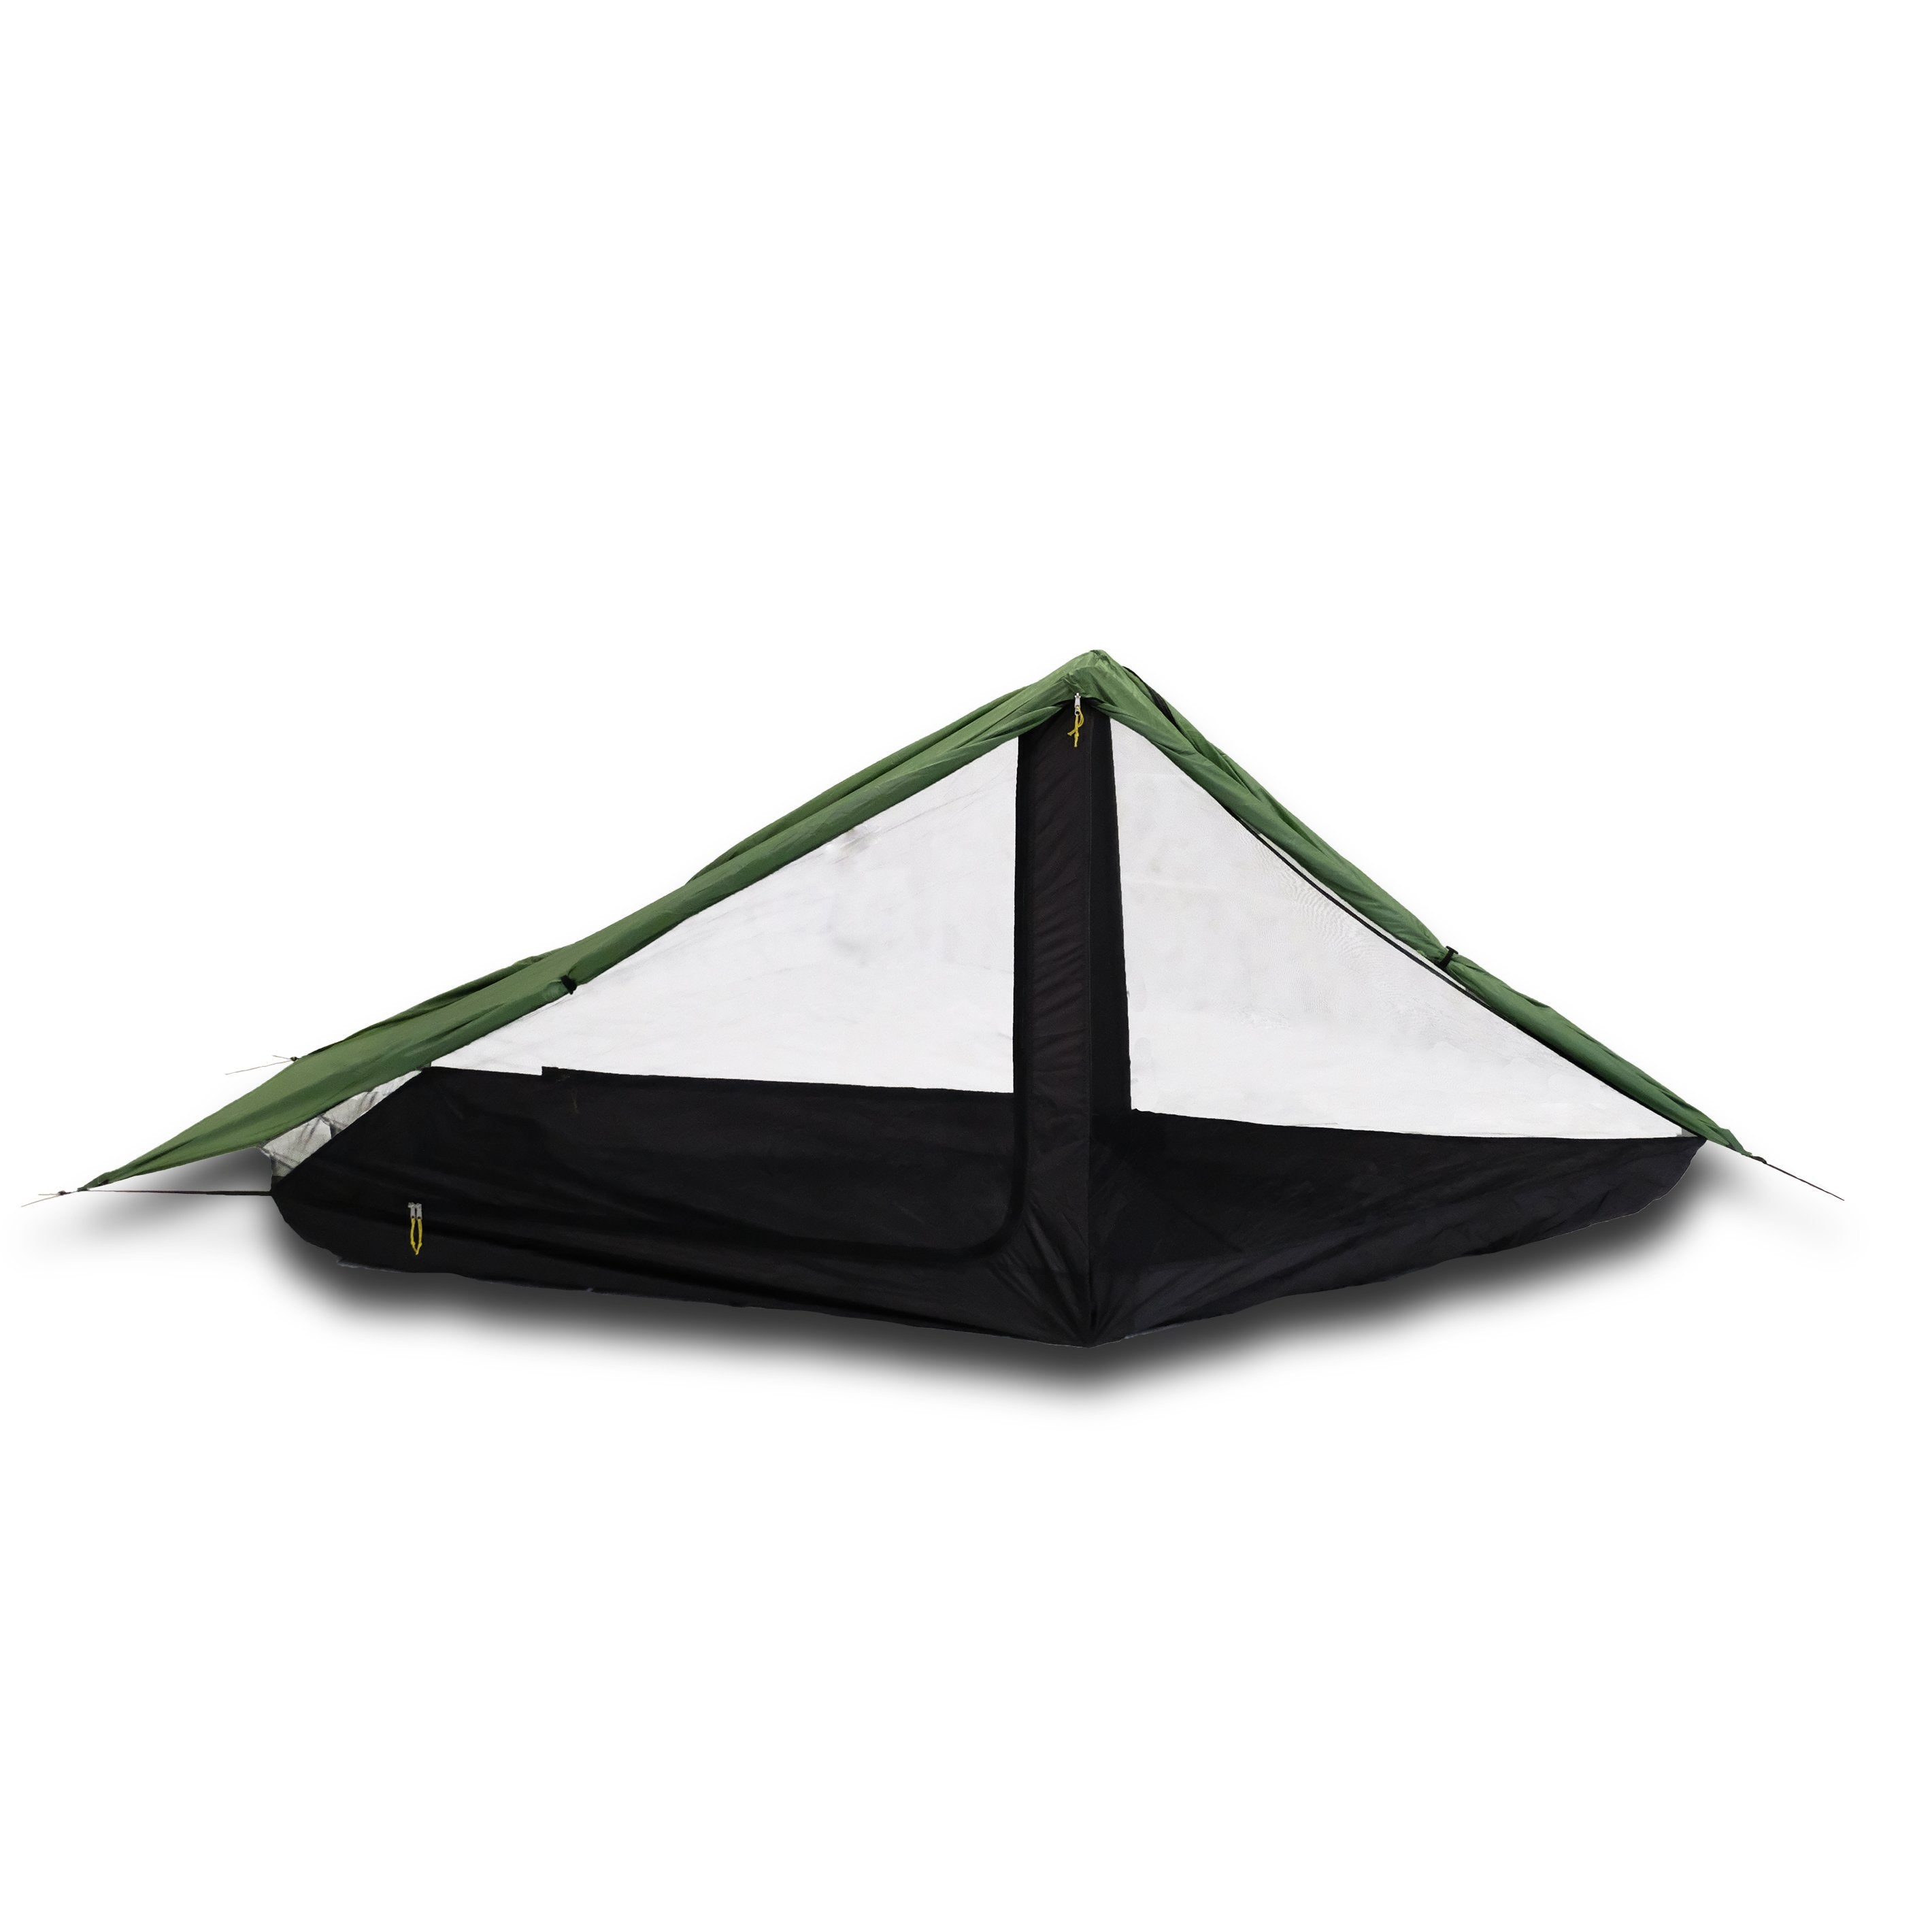 Skyscape Scout Ultralight 1 Person Tent with doors open